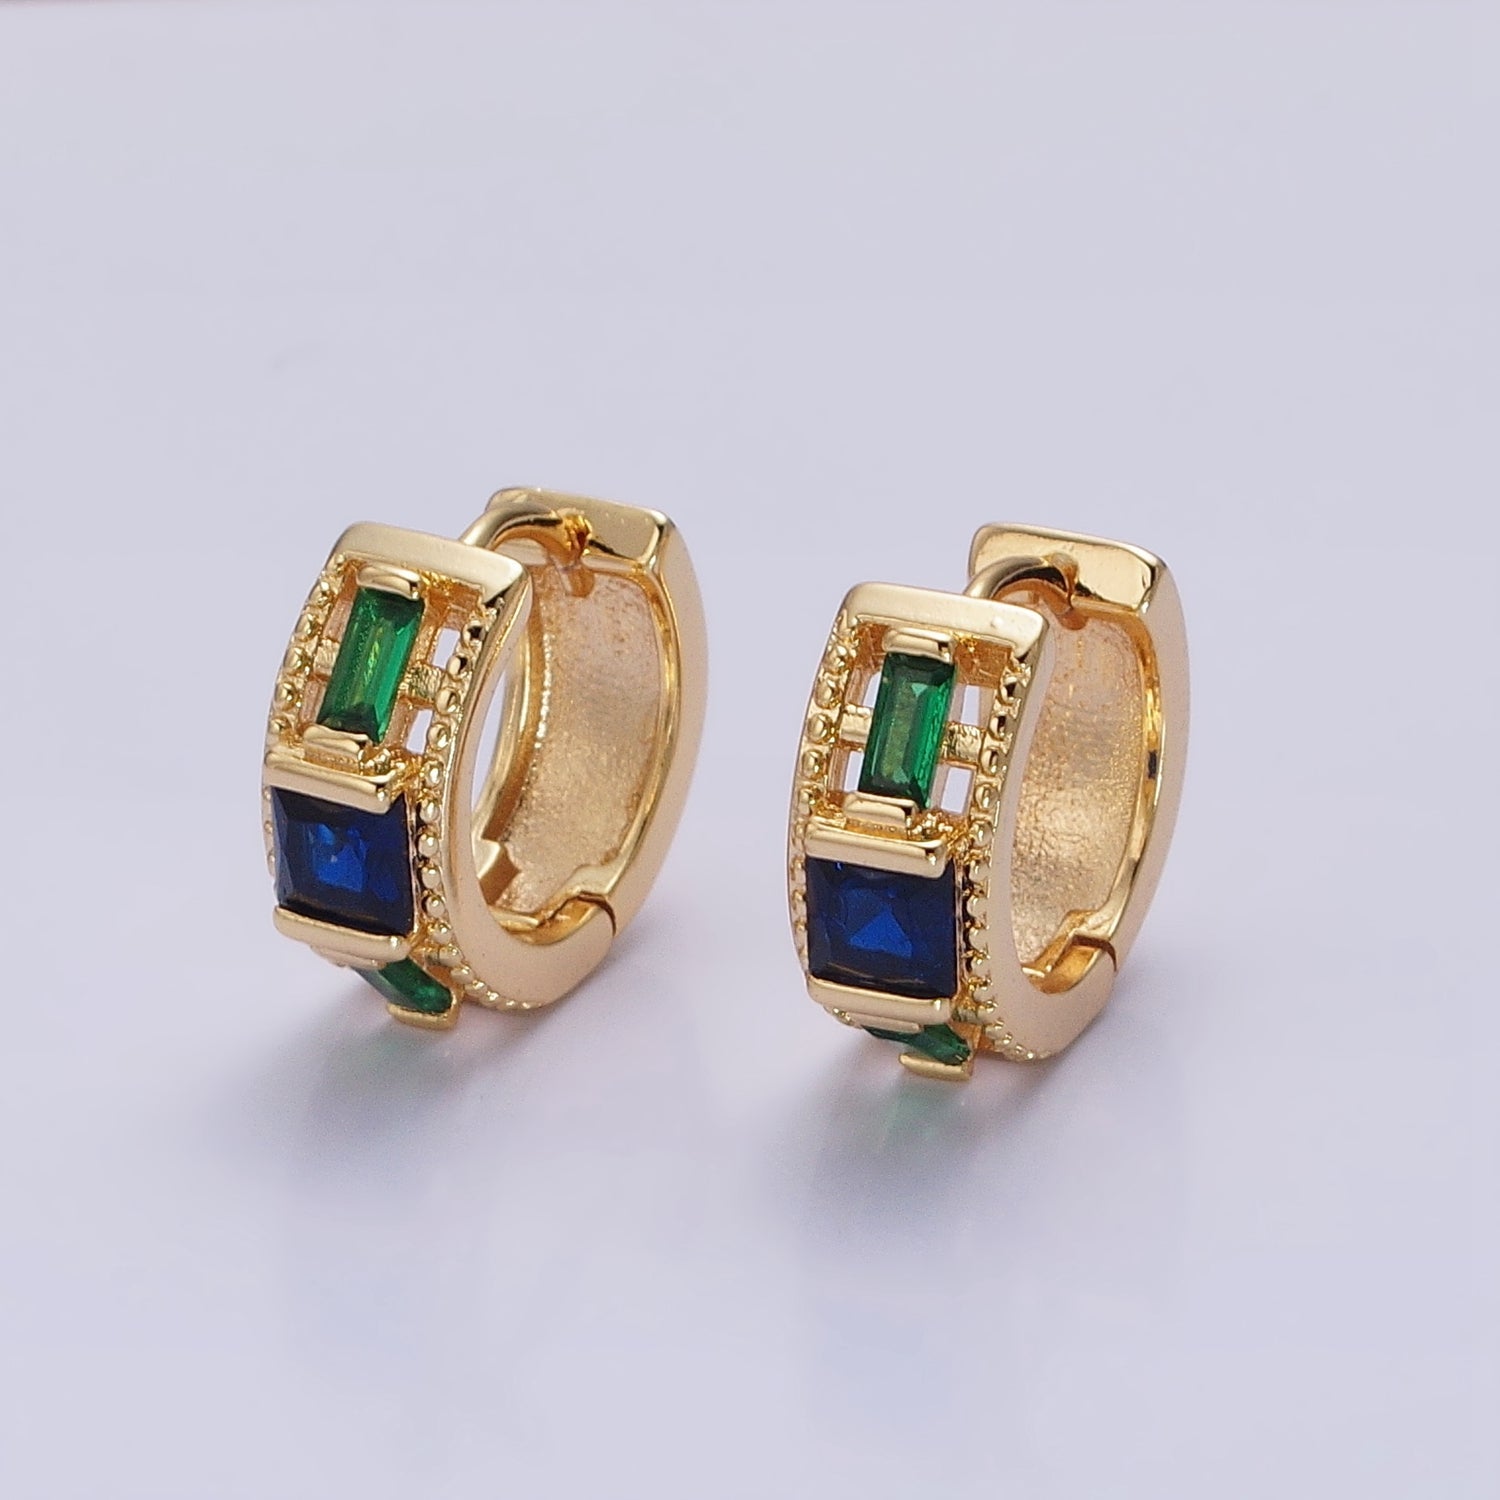 Silver, Gold Green Baguette Blue Square CZ Lined Wide 13.5mm Huggie Earrings | AB804 AB822